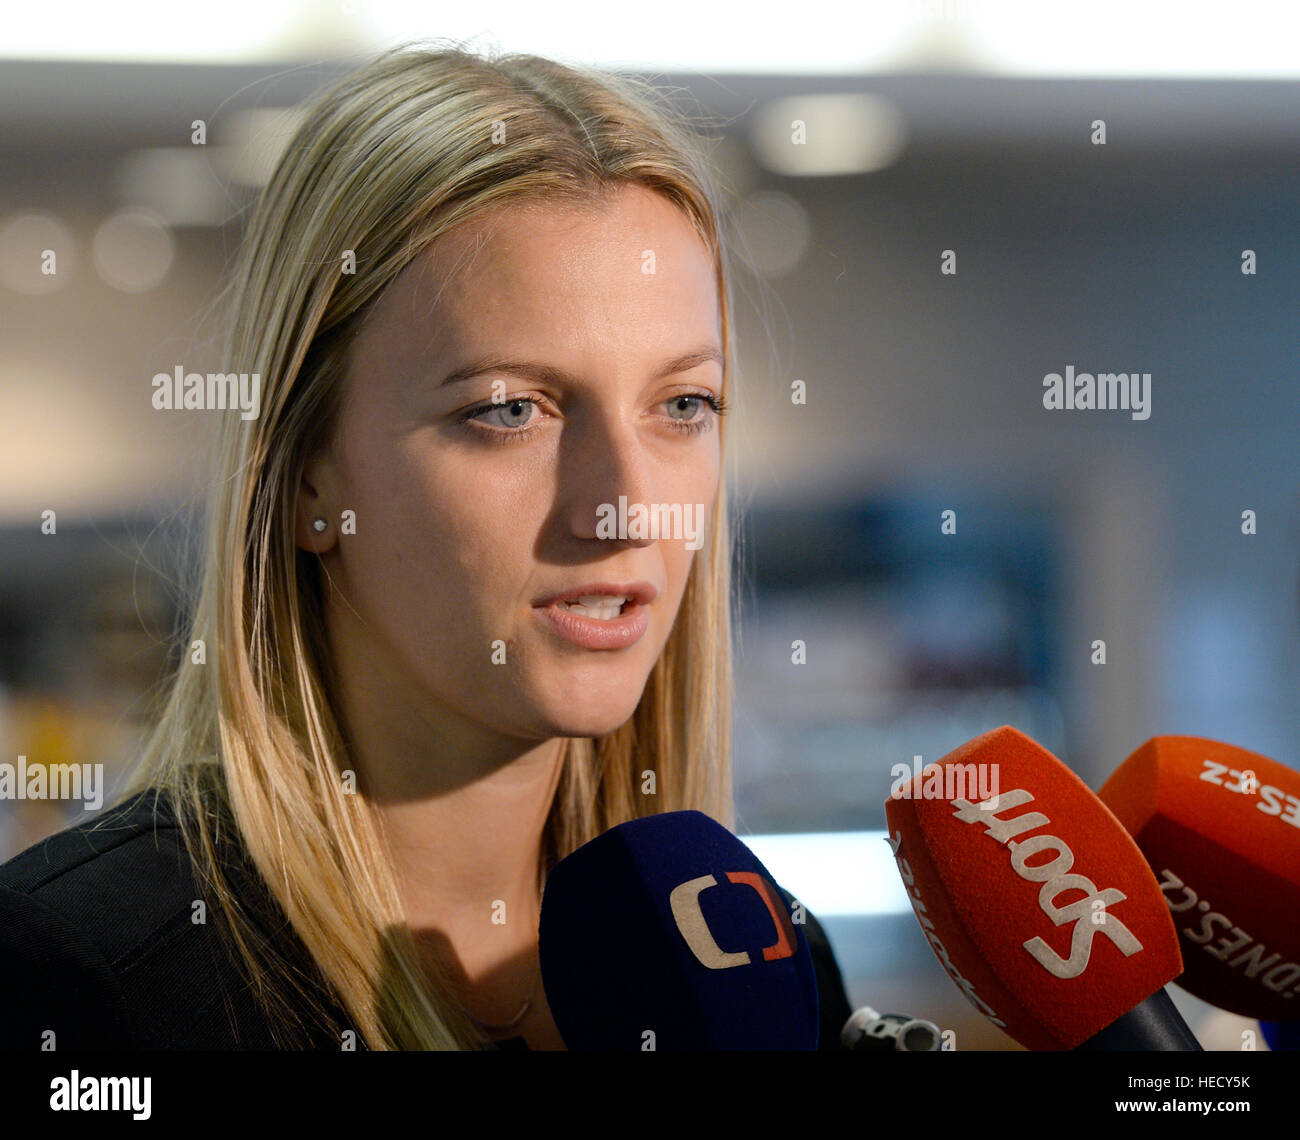 Prague, Czech Republic. 01st Feb, 2016. ***FILE PHOTO FROM FEBRUARY 1, 2016*** Czech Wimbledon winner Petra Kvitova was attacked in her flat today, on Tuesday, December 20, 2016, and her spokesman Karel Tejkal said she is treated by doctors. Sport.cz server wrote that she has cuts on a hand because she was defending herself in the attack. 'It was a chance crime. She was attacked in her flat and is looked after doctors. The injury does not threaten her life,' Tejkal told CTK without elaborating. © Michal Krumphanzl/CTK Photo/Alamy Live News Stock Photo